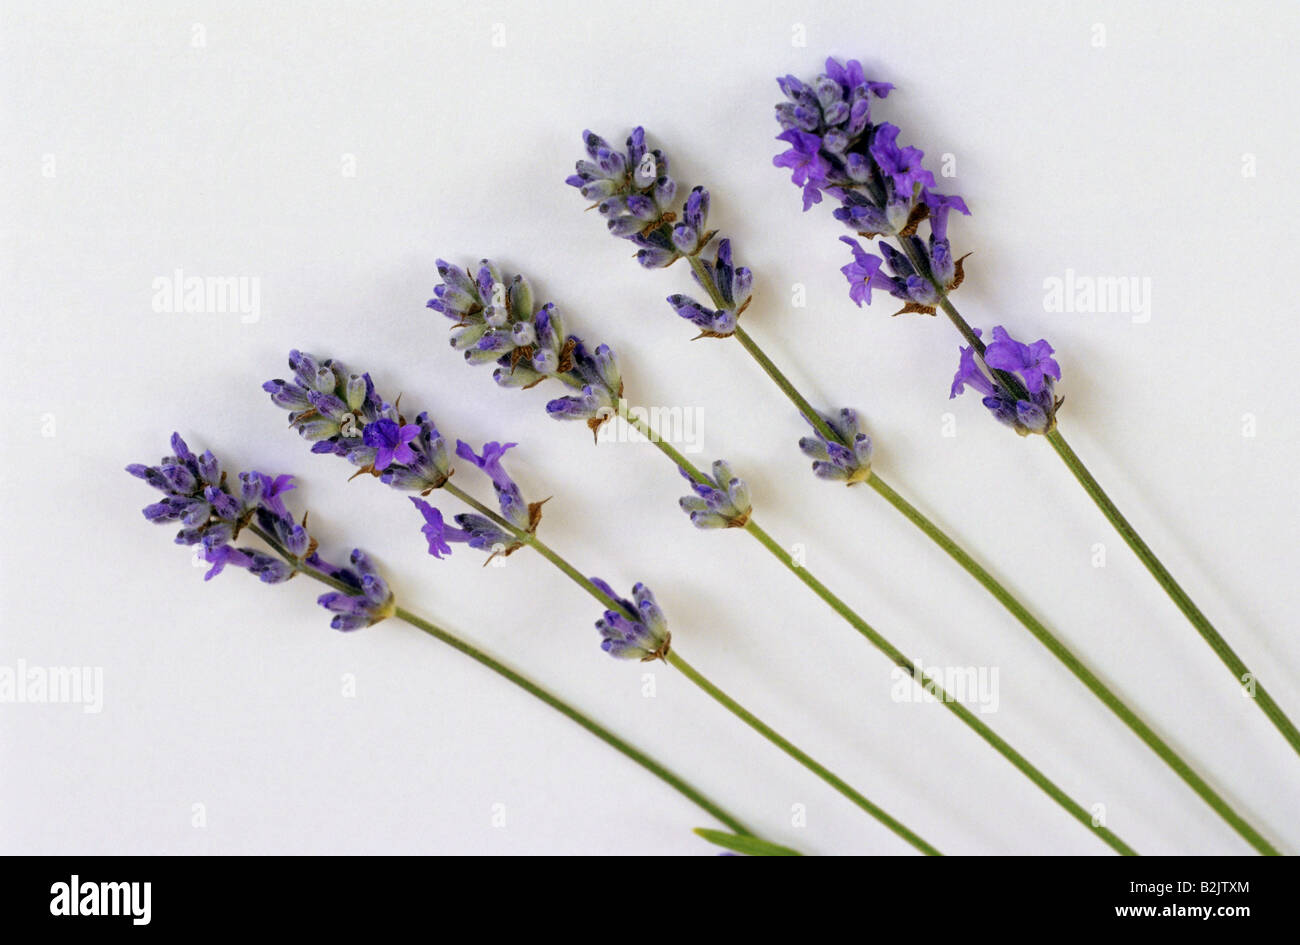 Botanik, Lavendel (Lavendula angustifolia), Detail: Lavendel, Bloom, Additional-Rights - Clearance-Info - Not-Available Stockfoto